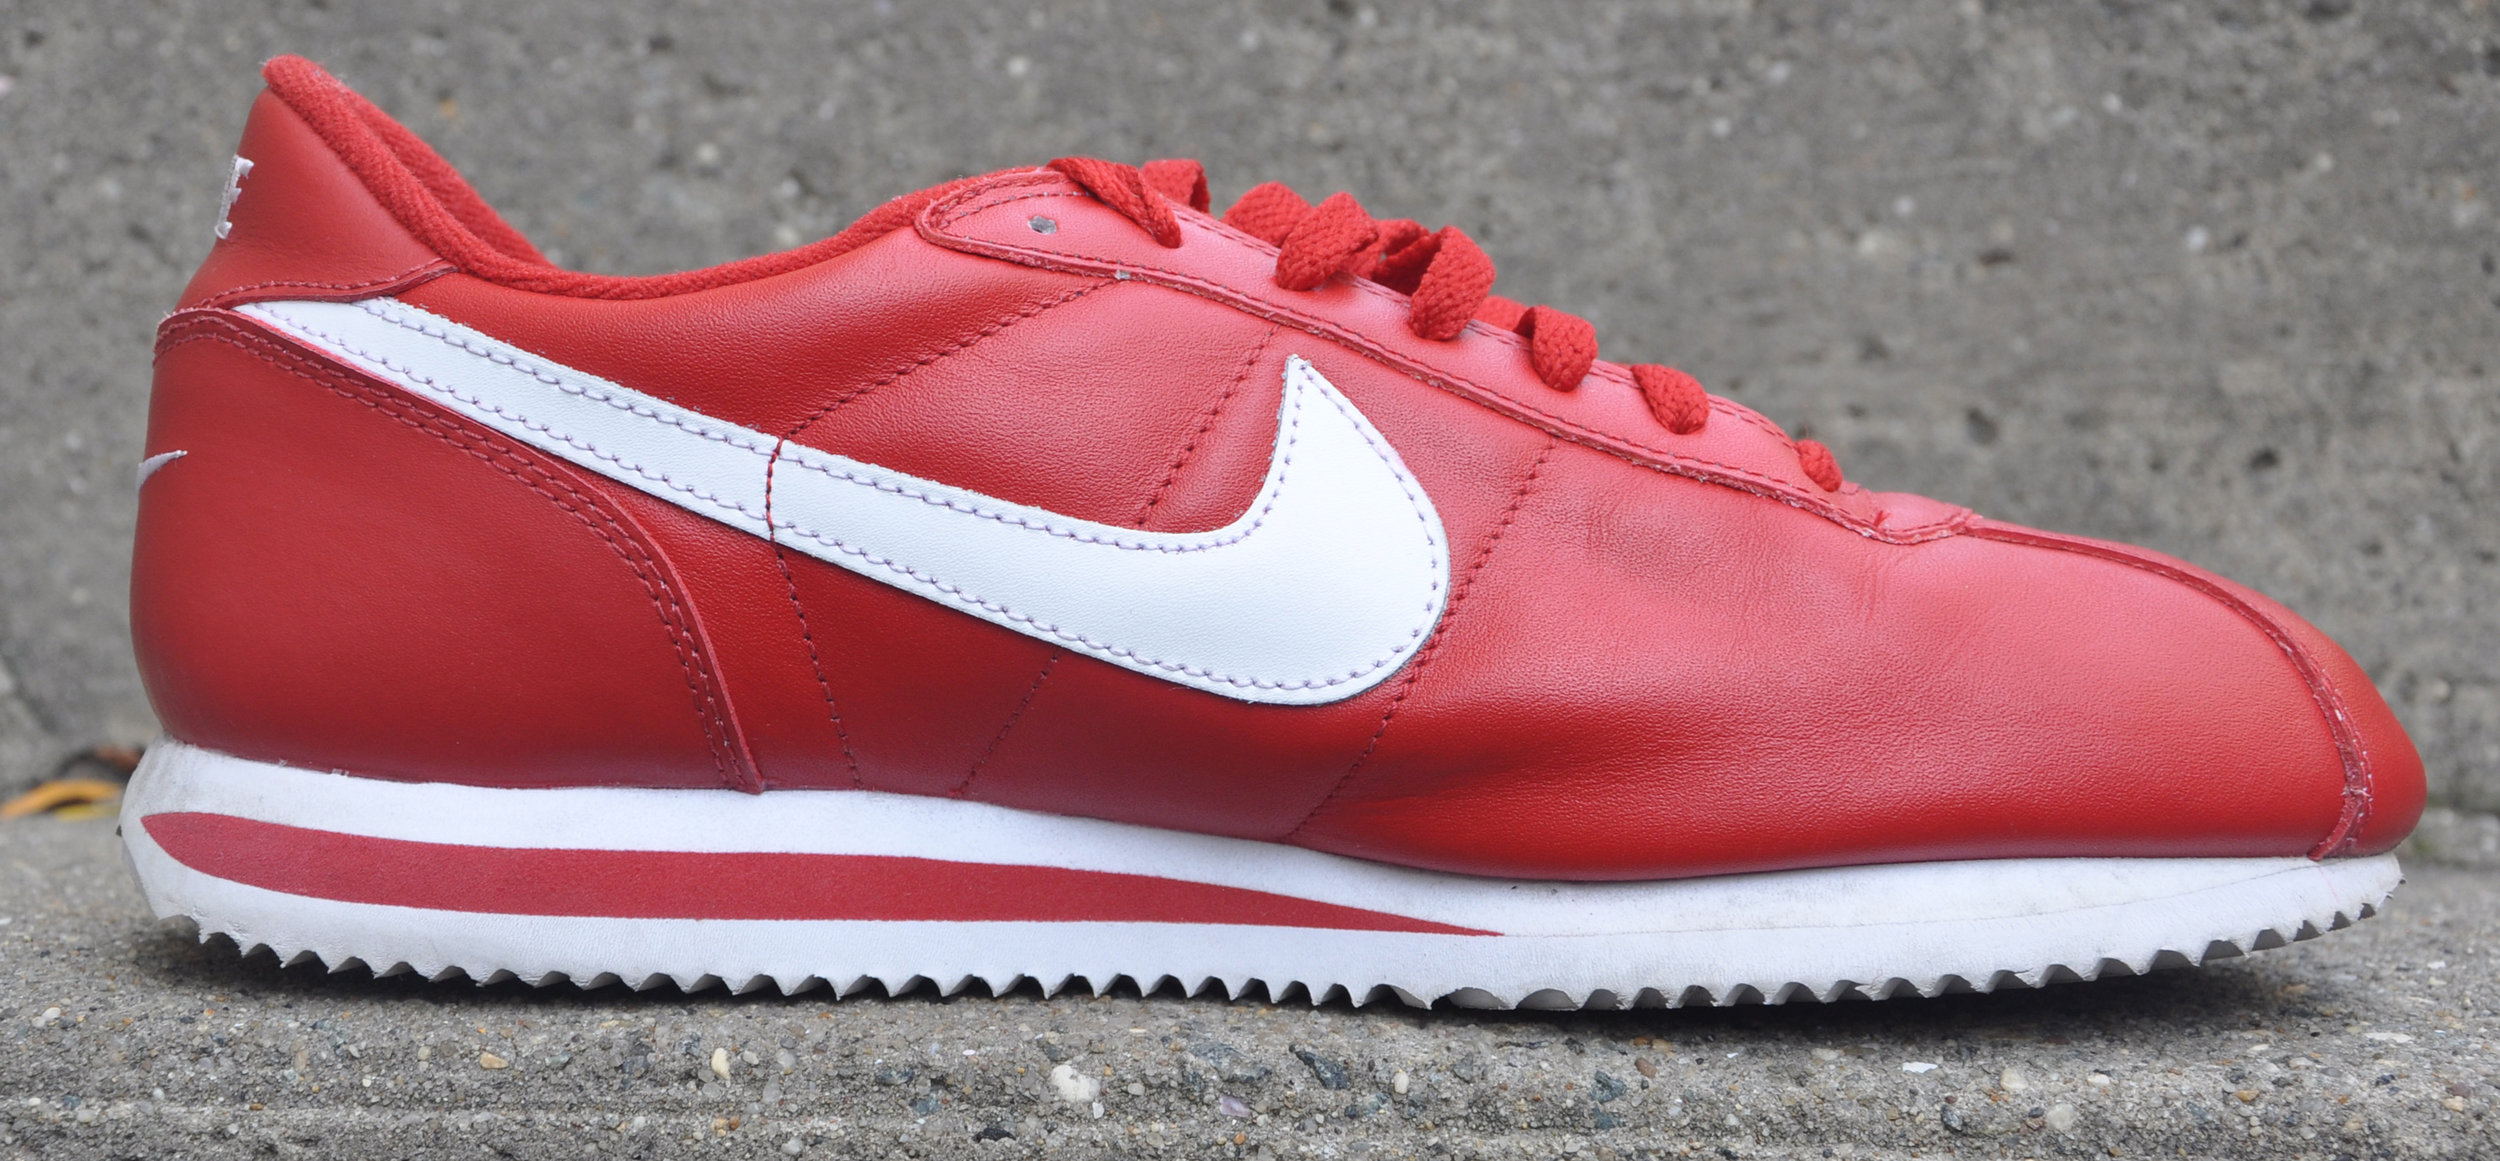 nike cortez red leather 